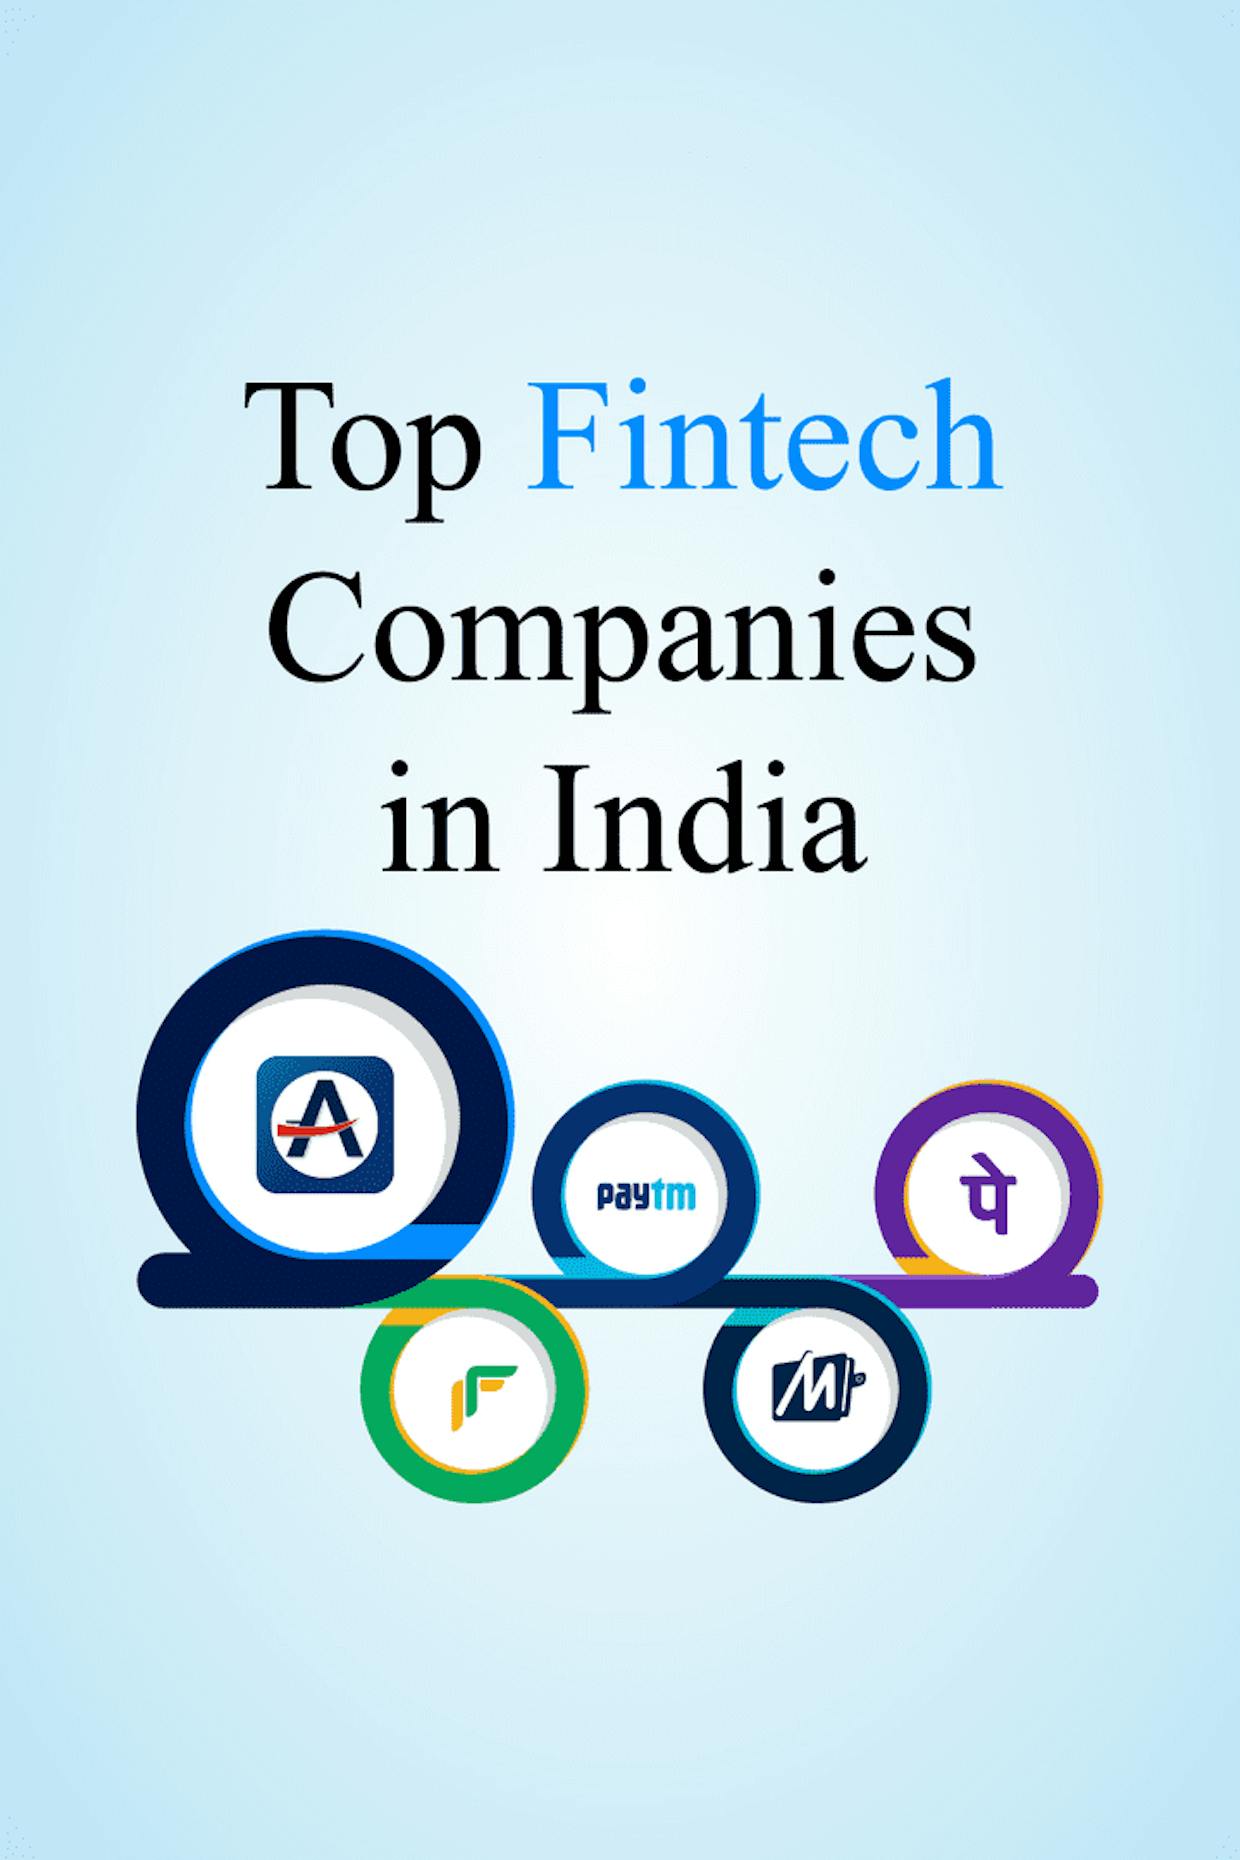 Top Fintech Companies In India